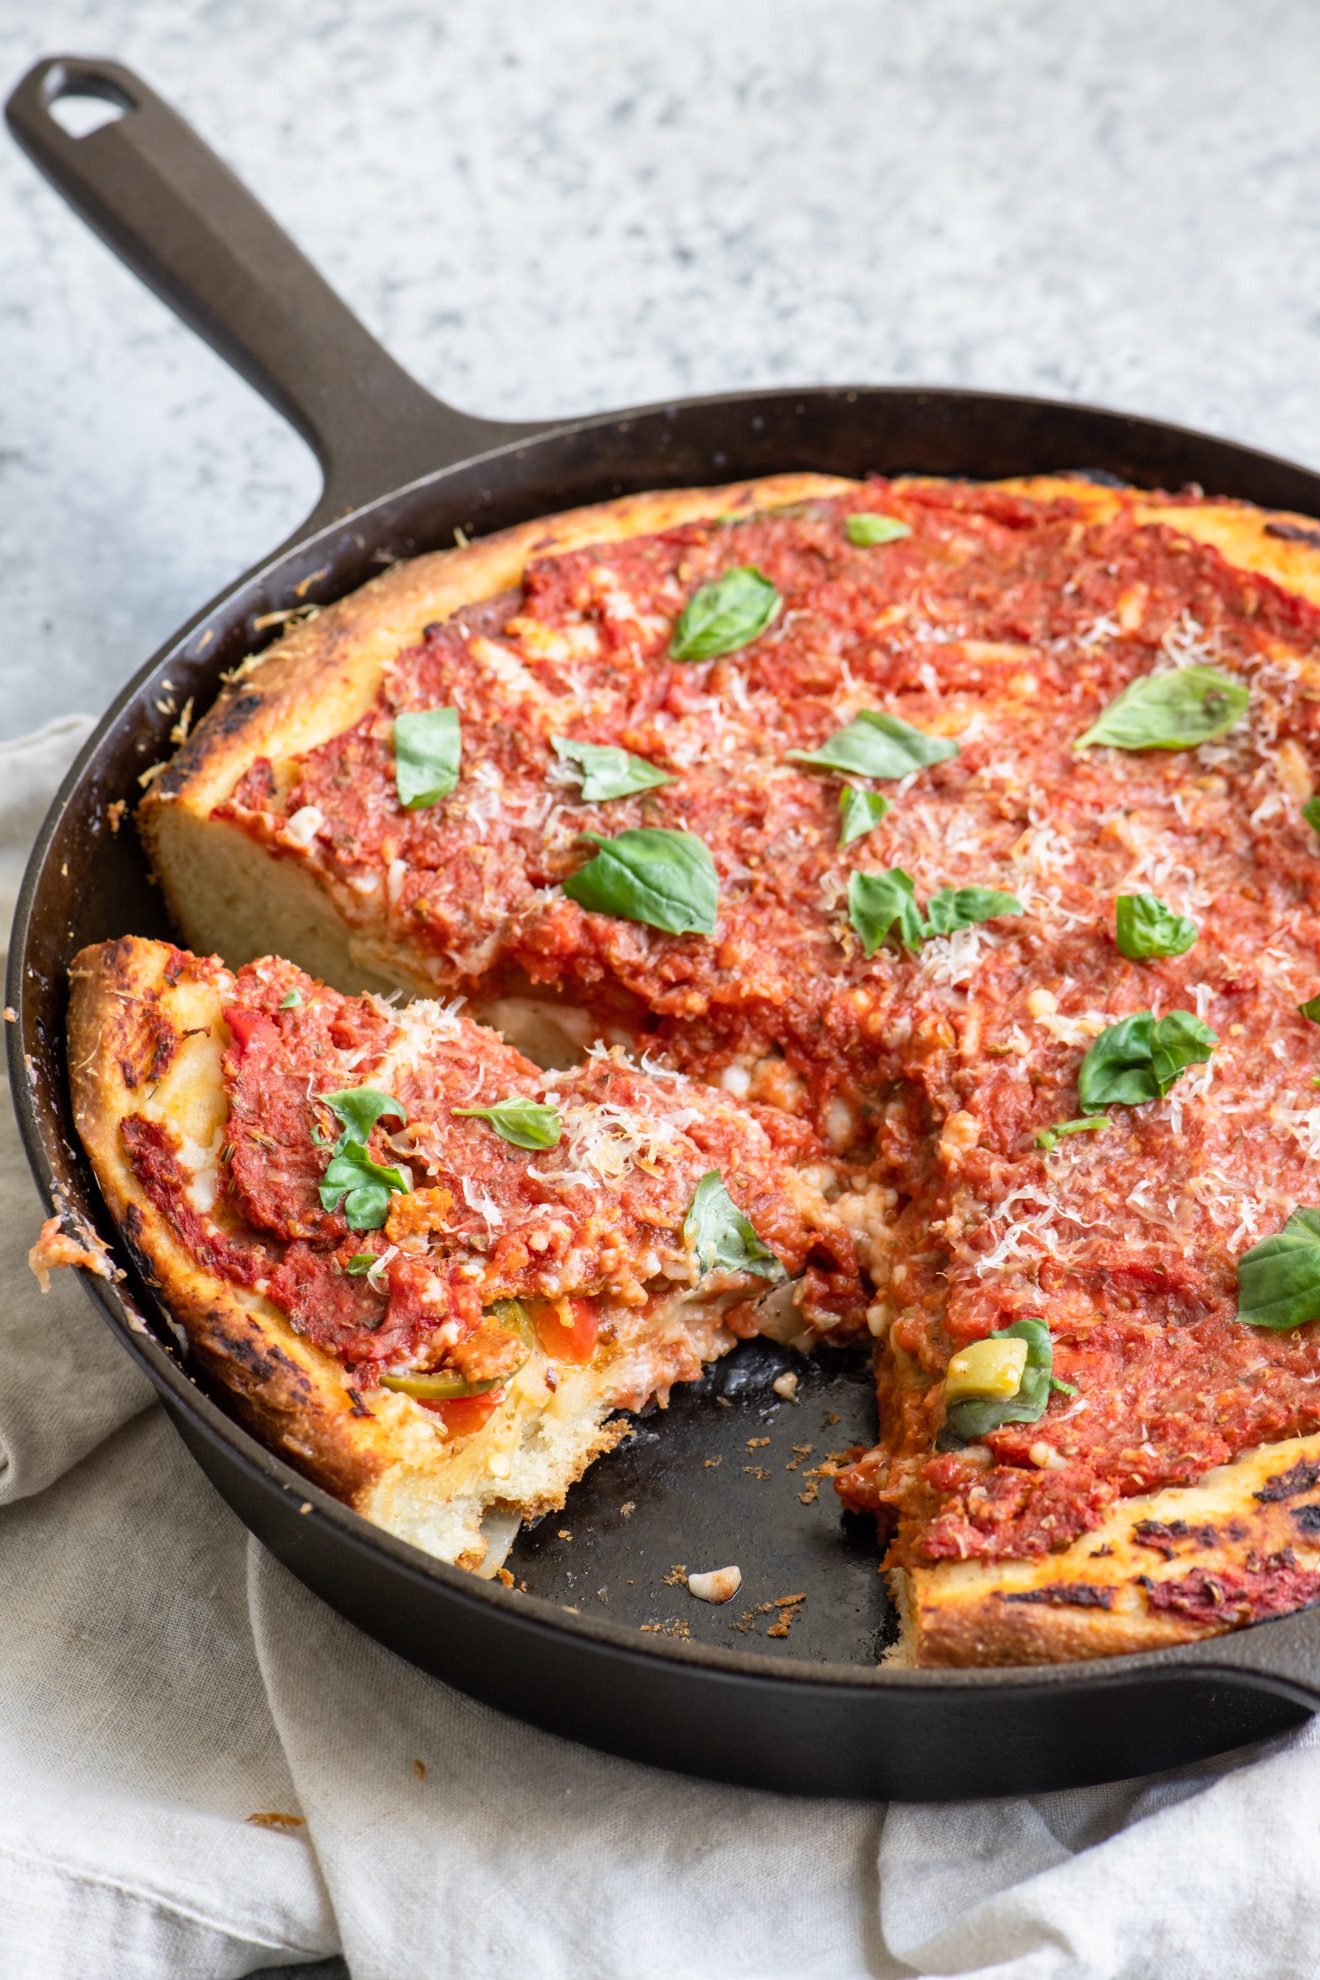 ChicagoStyle Deep Dish Pizza Recipe • The Curious Chickpea